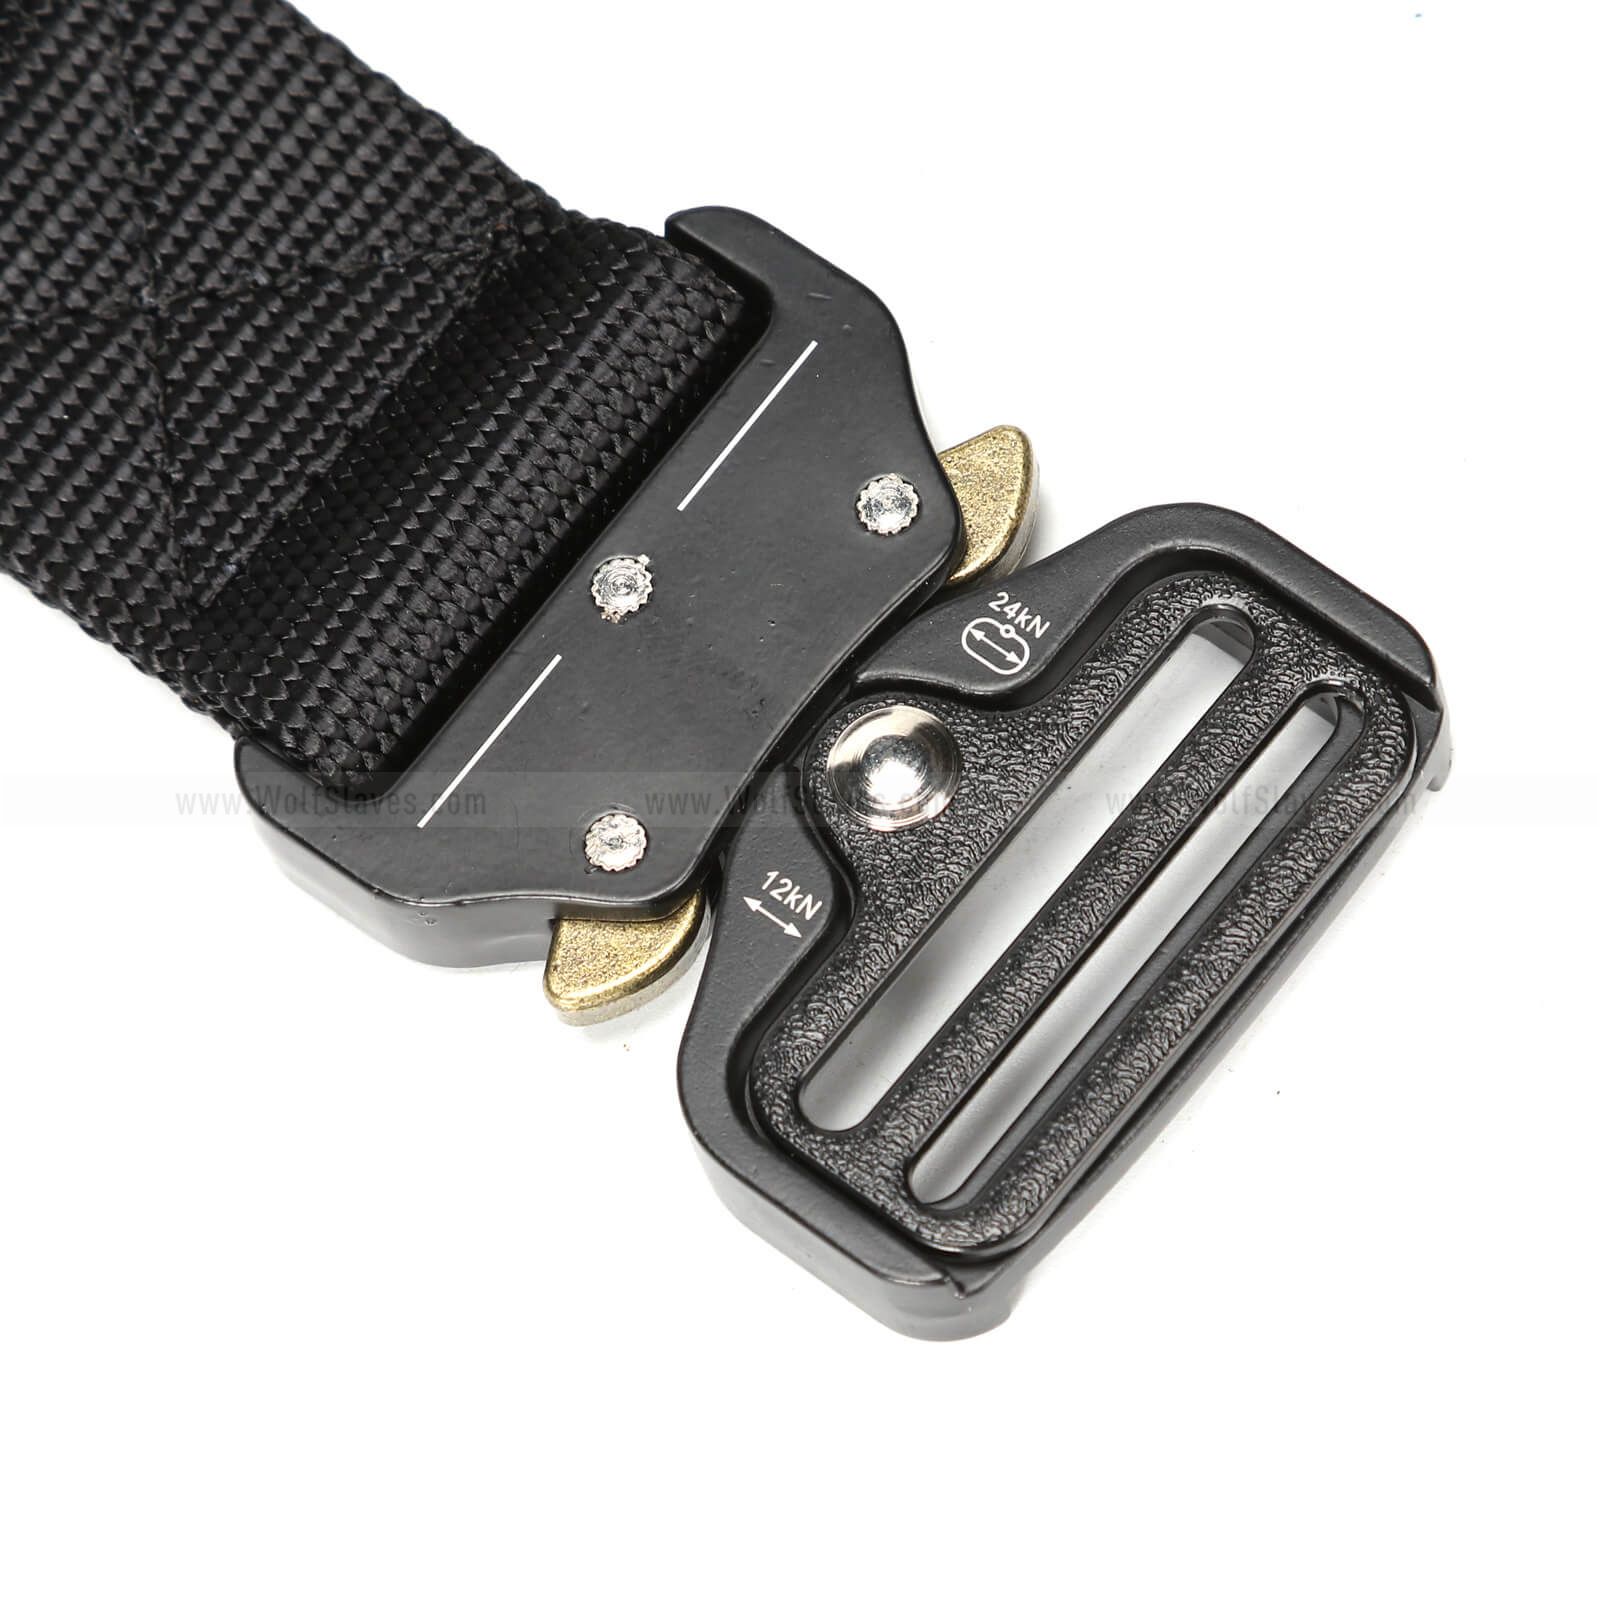 Sky-Welle Tactical Military Style Webbing Riggers Web Belt Heavy-Duty Nylon Quick-Release Metal Buckle